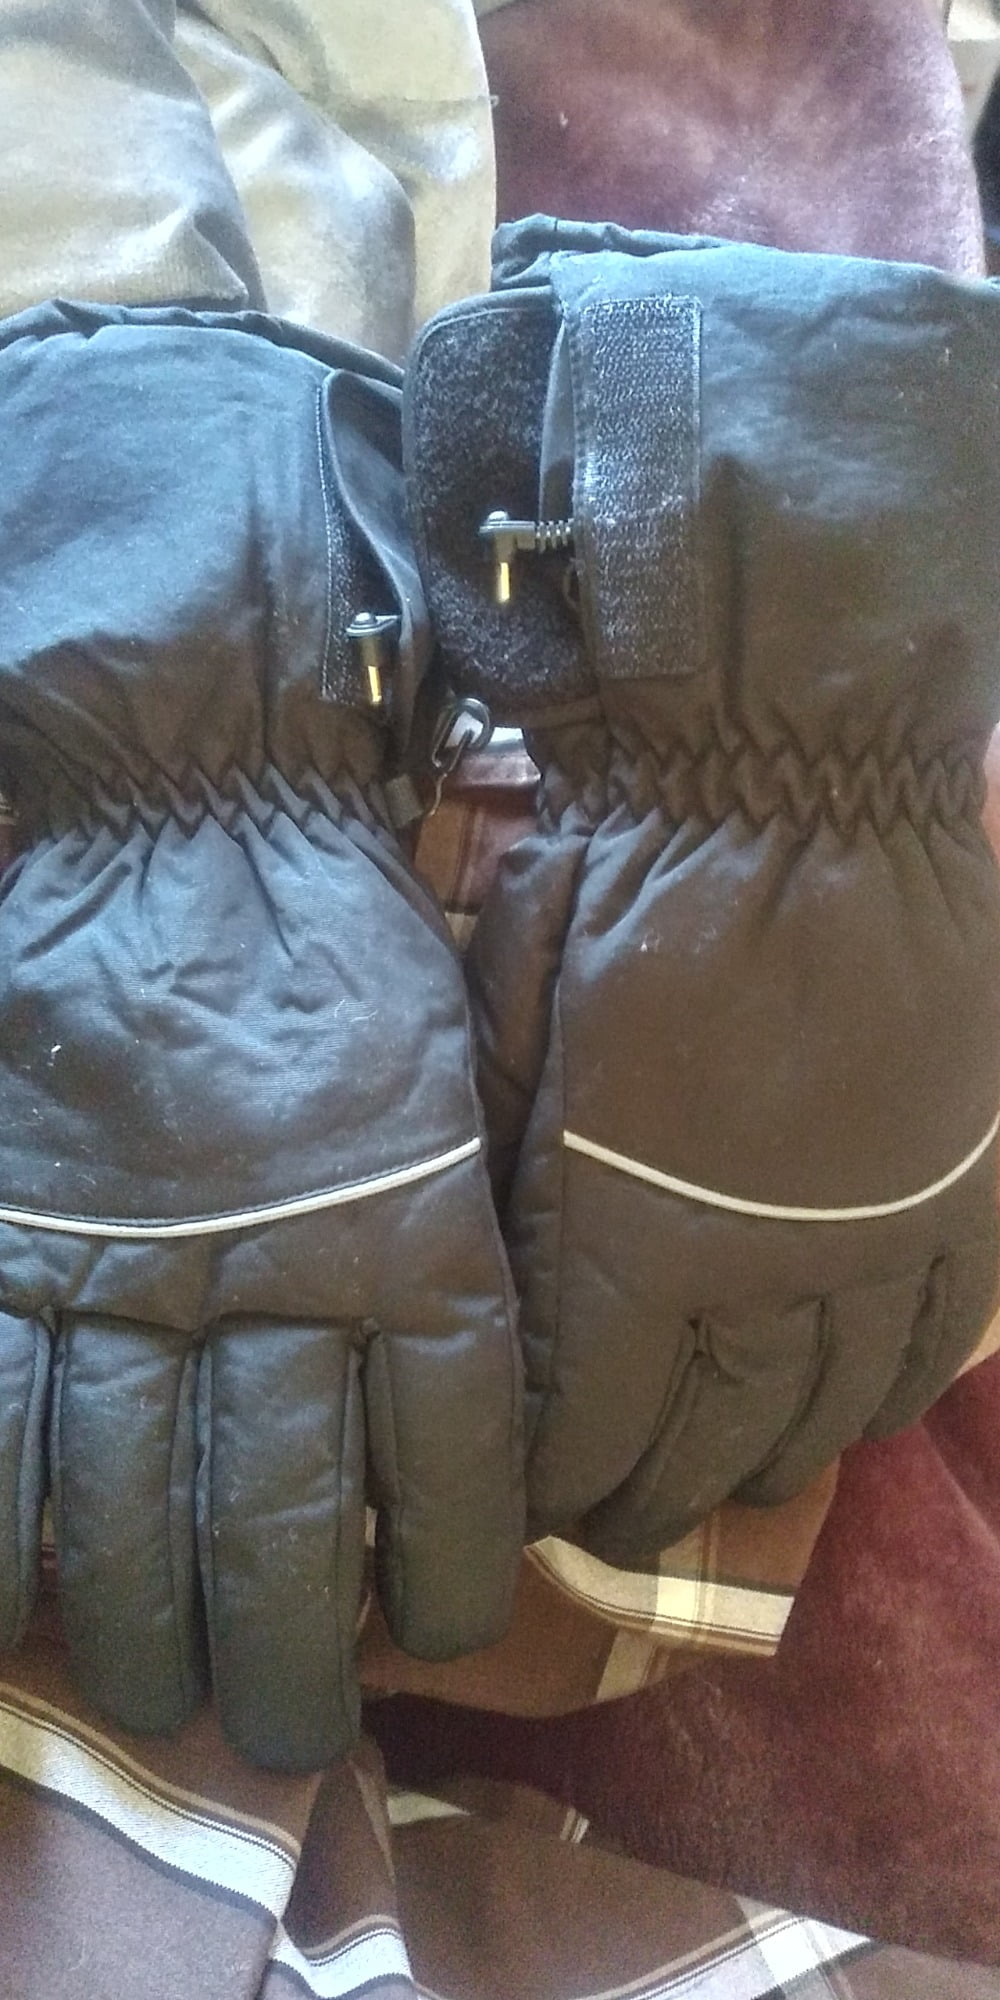 Warm Rechargeable Electric Heated Gloves, Five-finger Battery Box Heating Gloves photo review